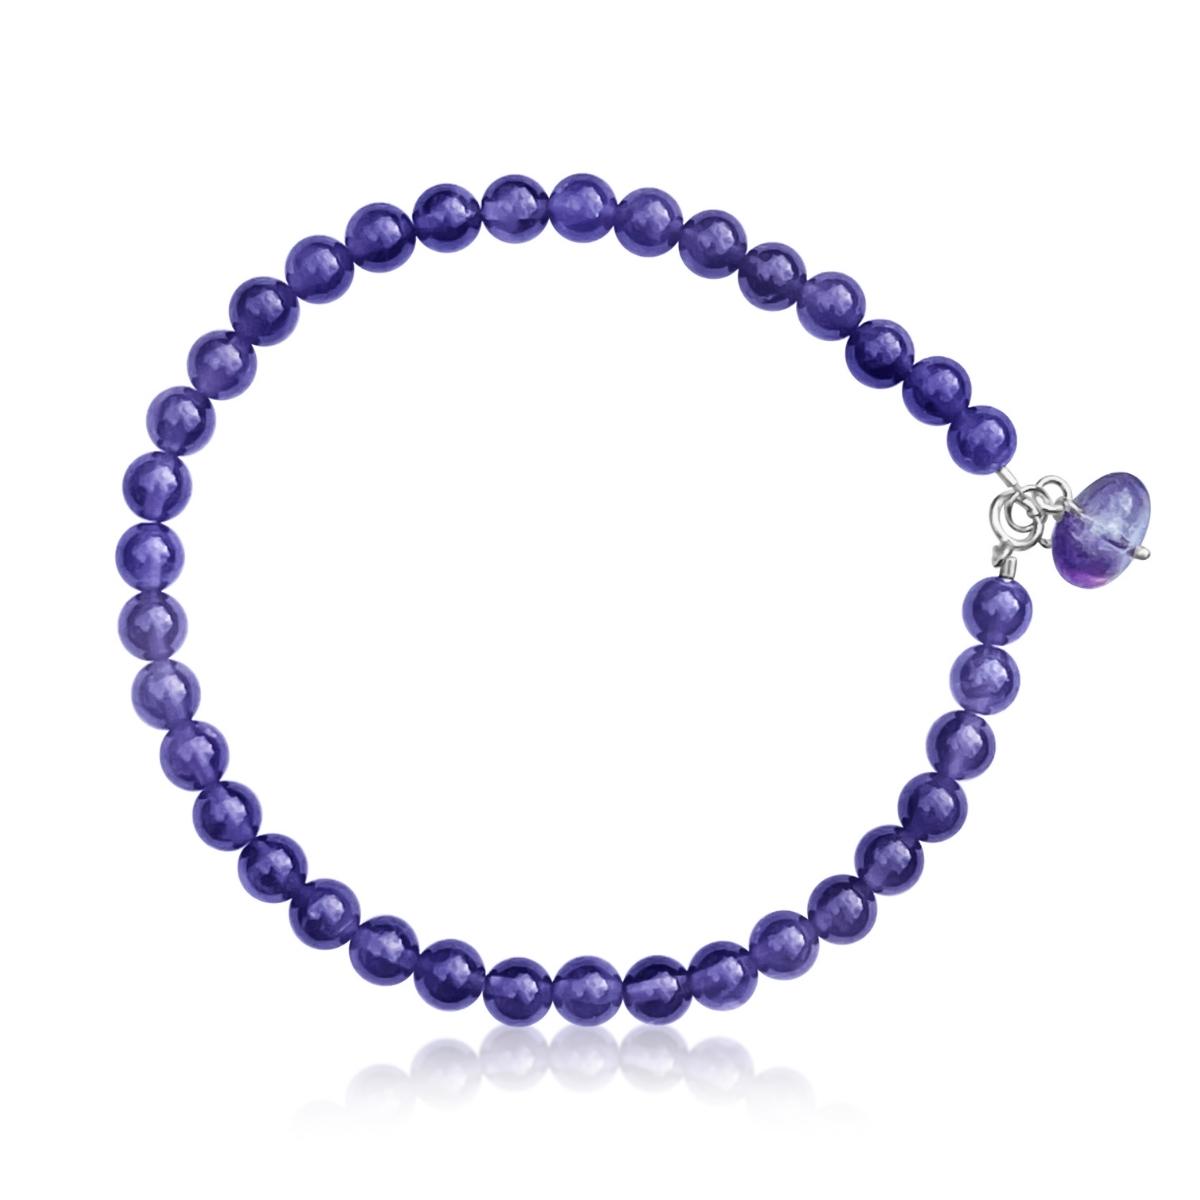 Soothing Emotions - Amethyst Anklet   Amethyst is the perfect stone for you if you are facing stressful times in your life.